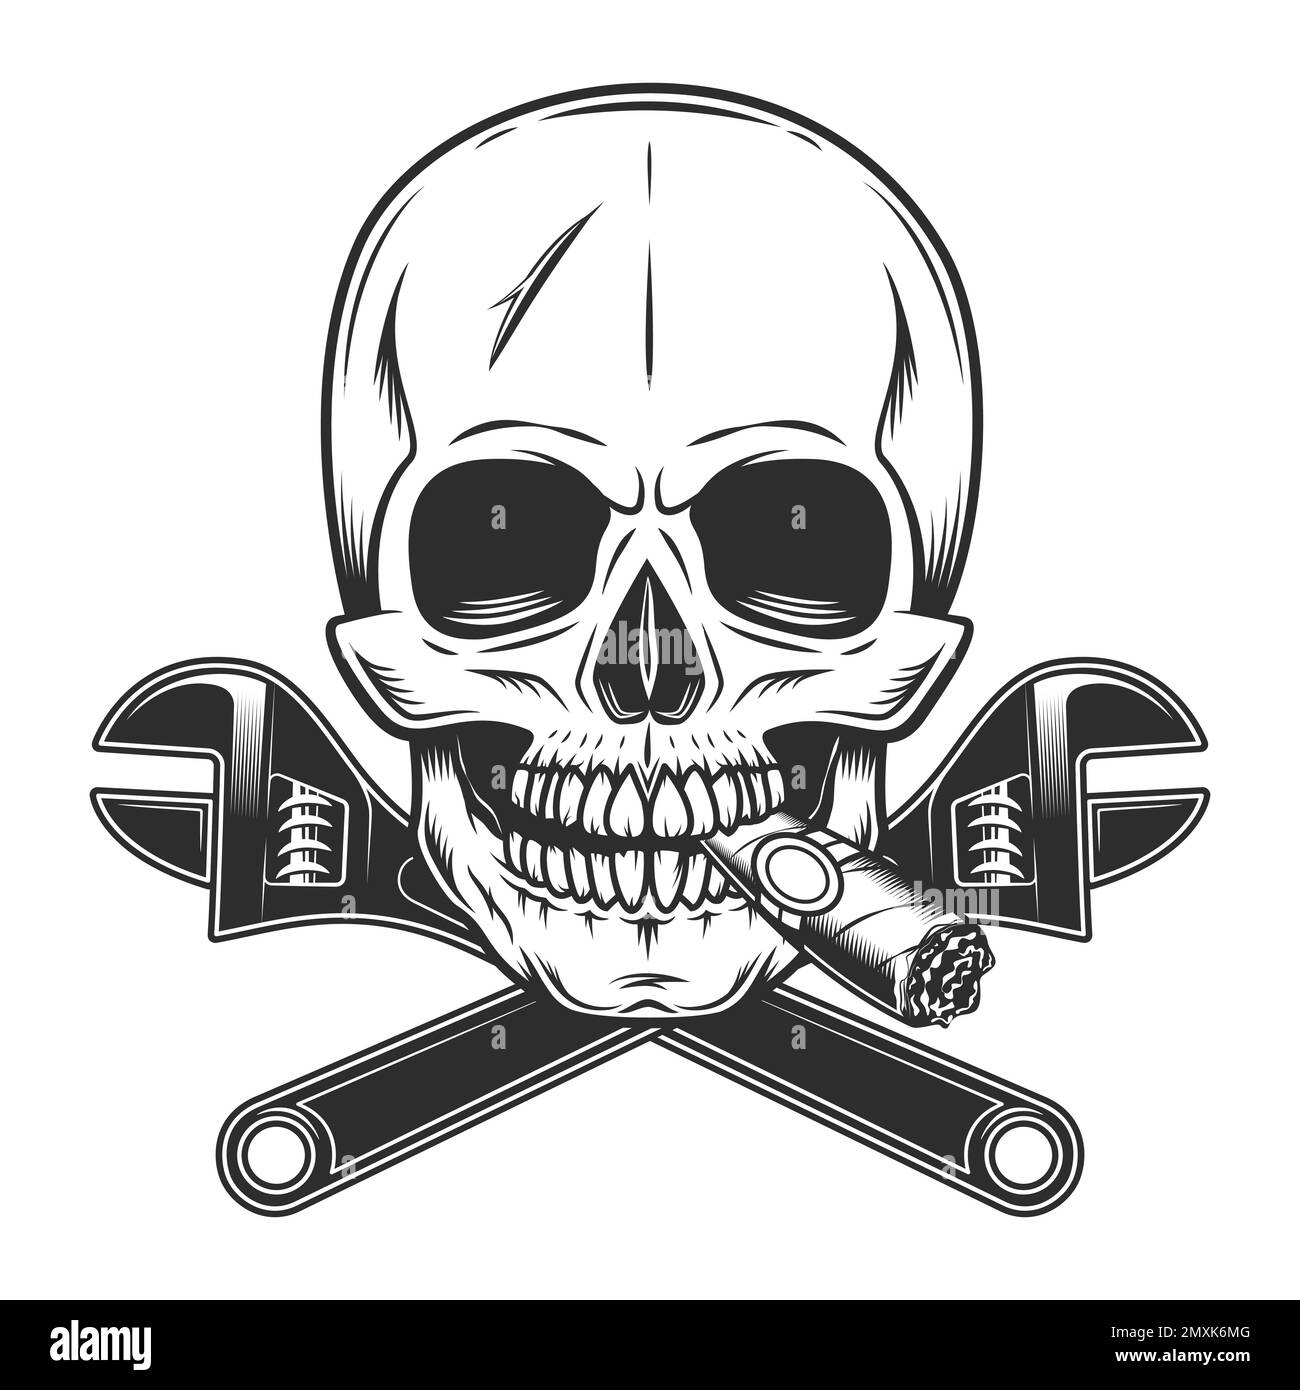 Skull  smoking cigar or cigarette smoke with wrench tools in monochrome illustration style vector icon. Construction spanner plumbing key tool isolate Stock Vector